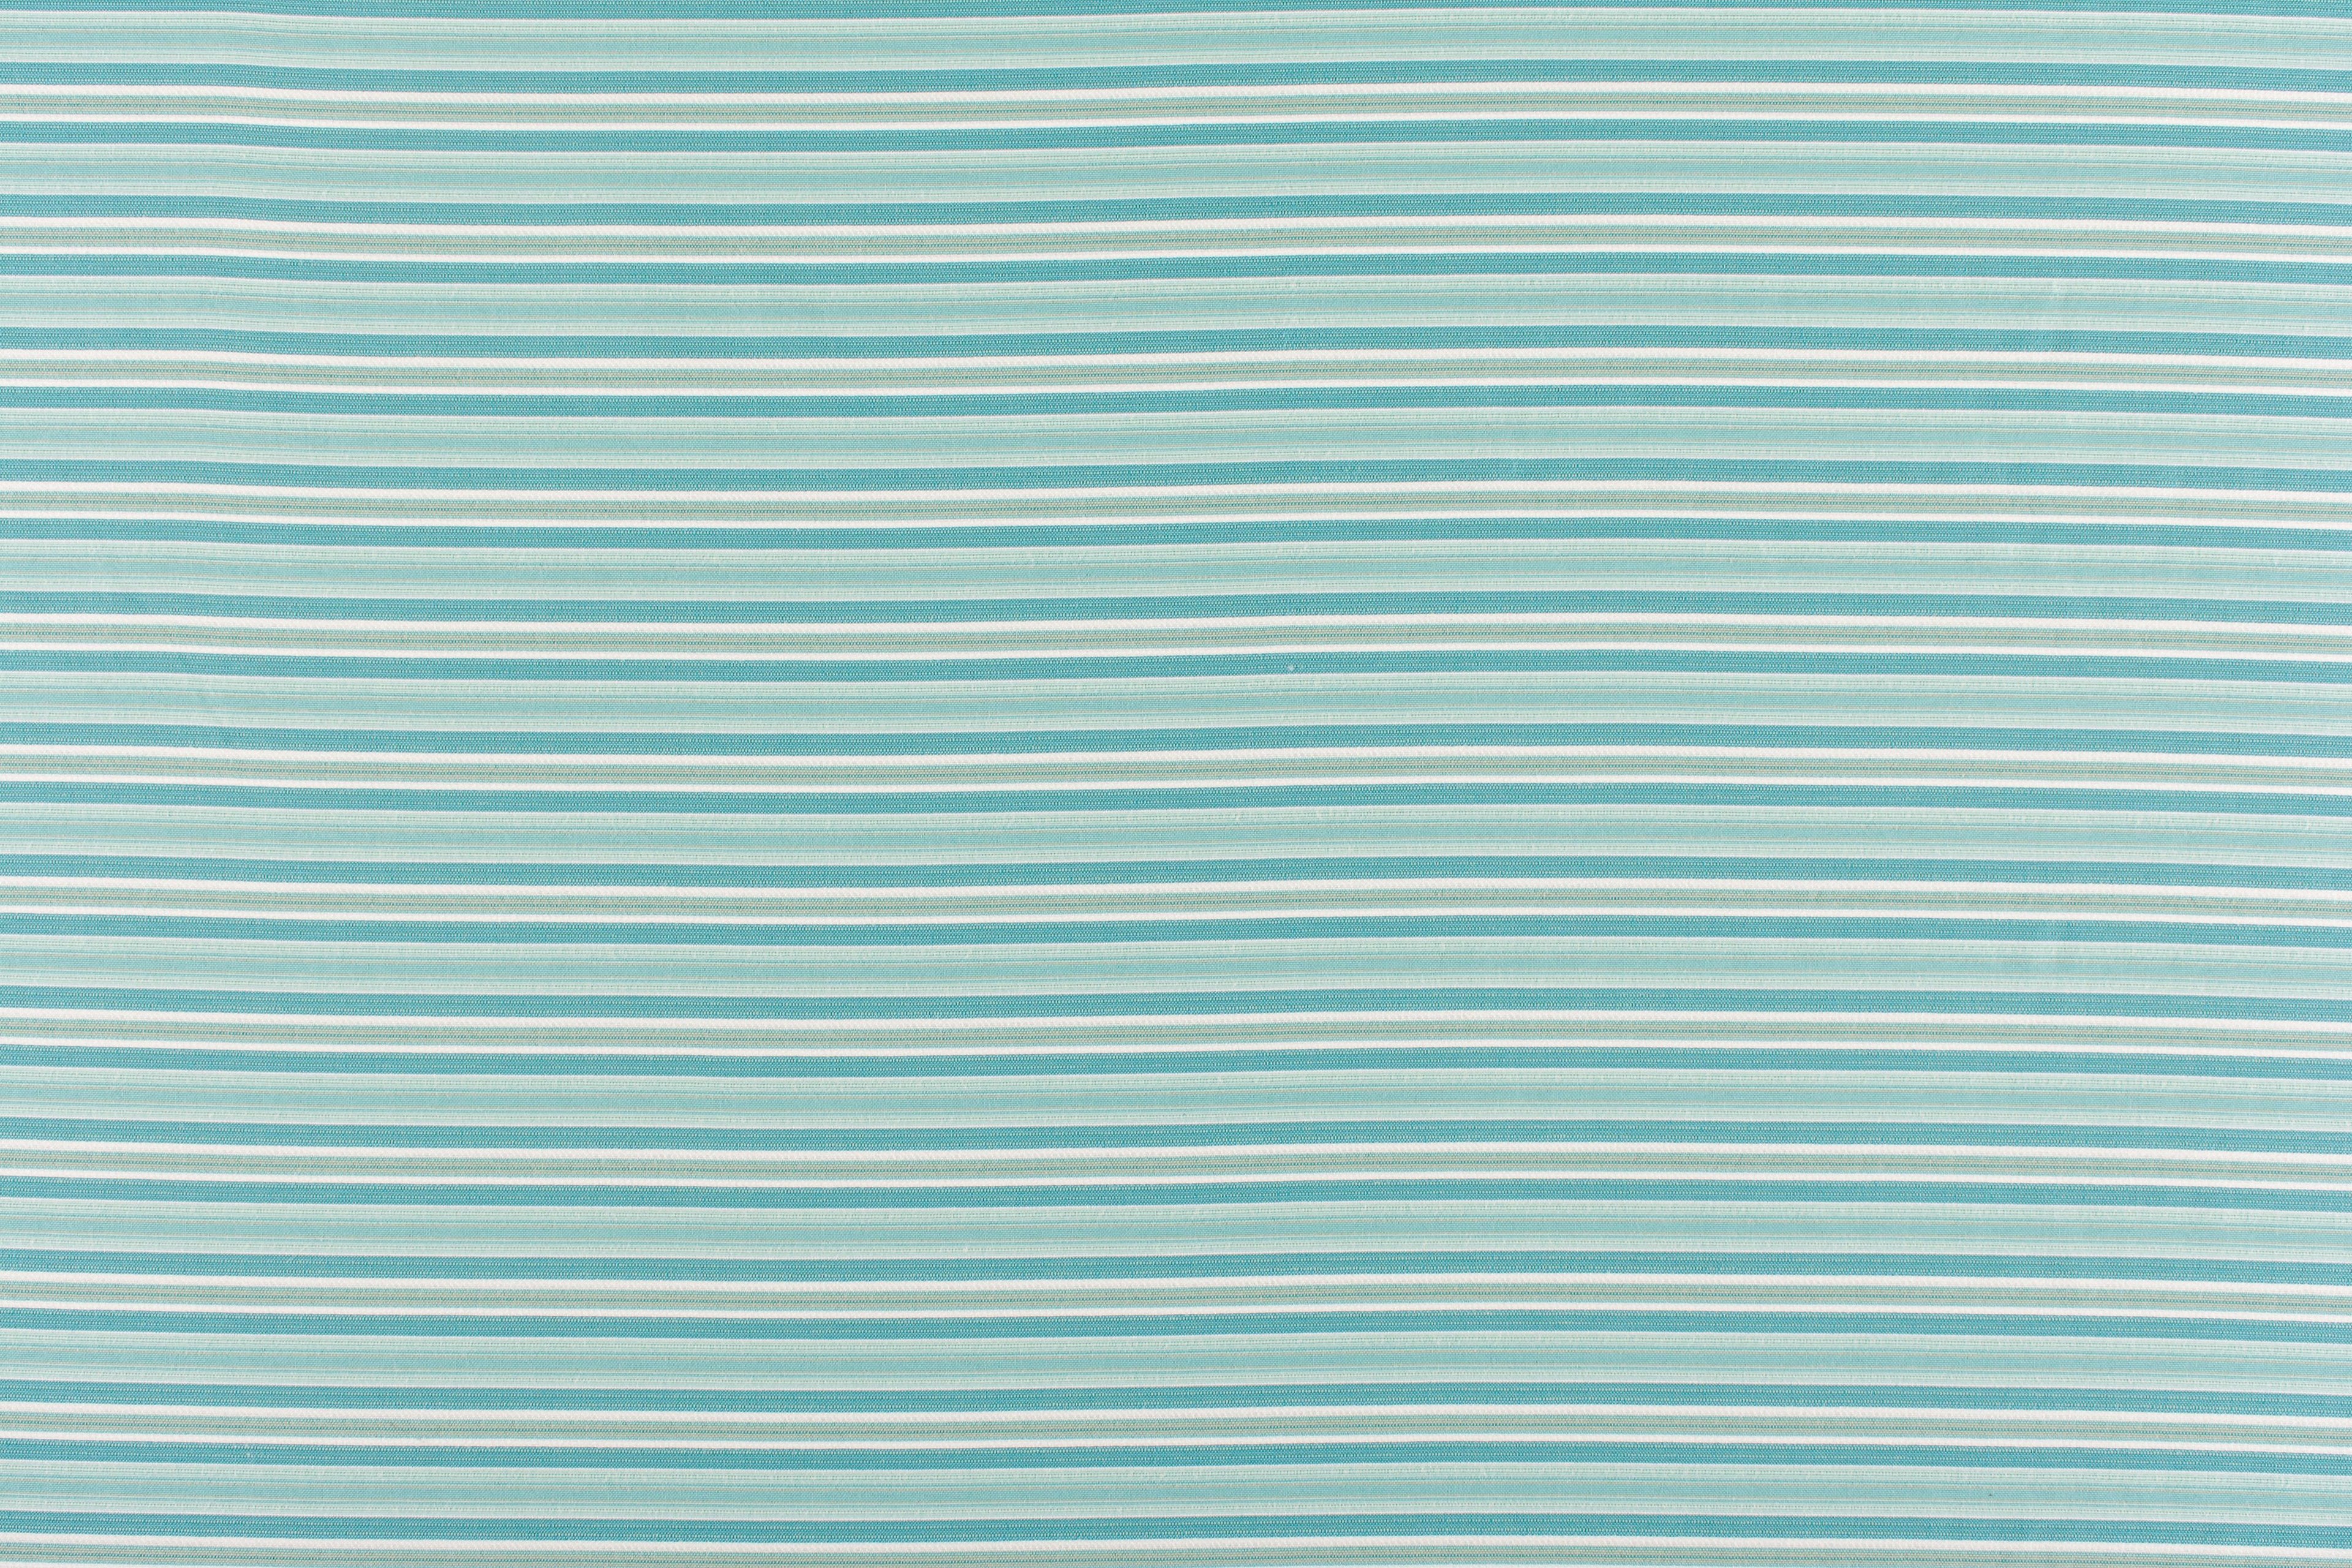 Steps Beach fabric in turquoise color - pattern number WR 00022661 - by Scalamandre in the Old World Weavers collection